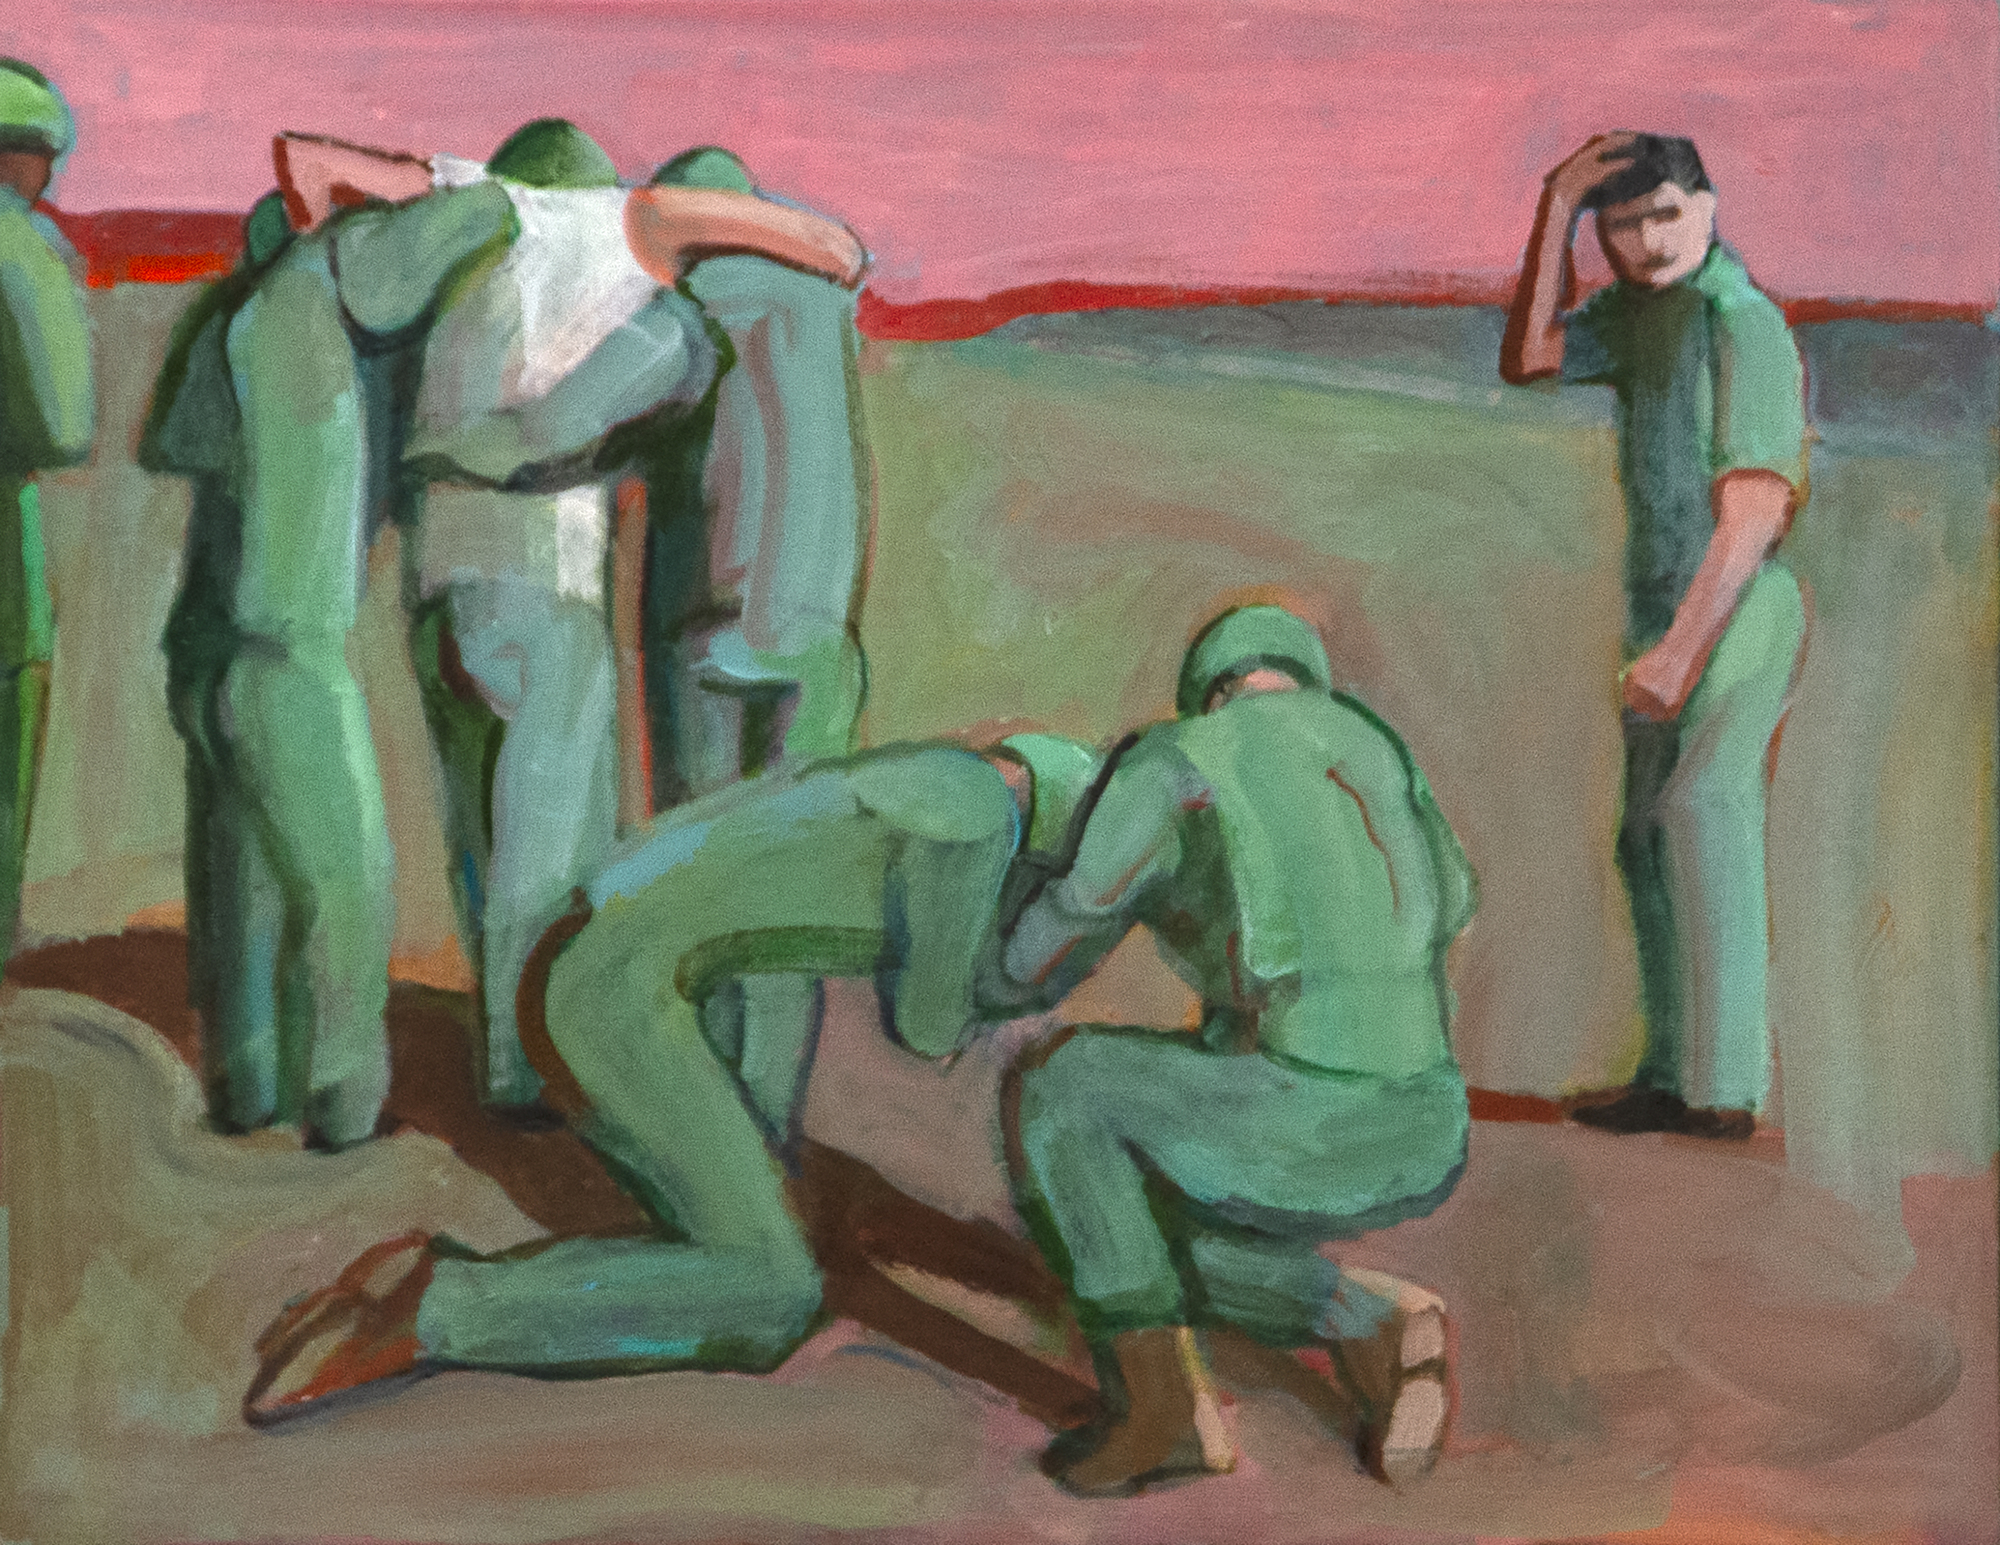 WILLIAM THEOPHILUS BROWN - Untitled (Soldiers) - acrylic on canvas - 14 x 18 in.